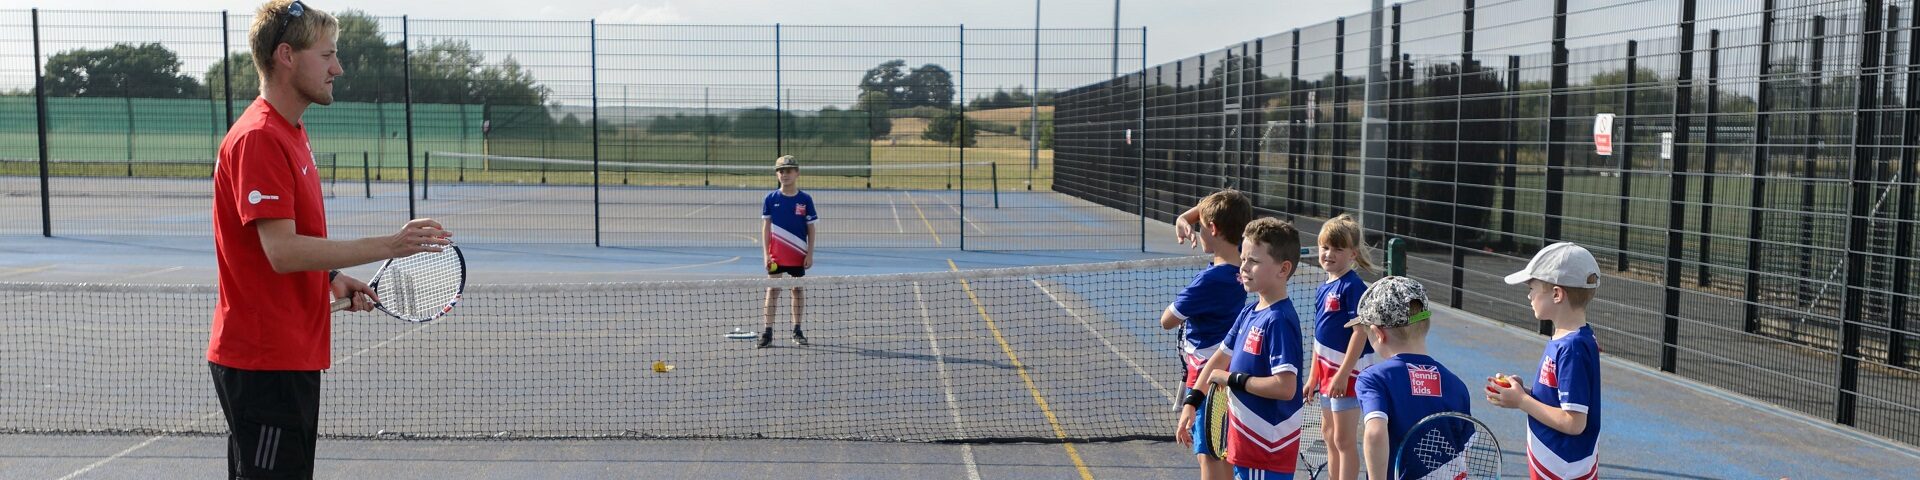 Coaching tennis (image by Sport England)